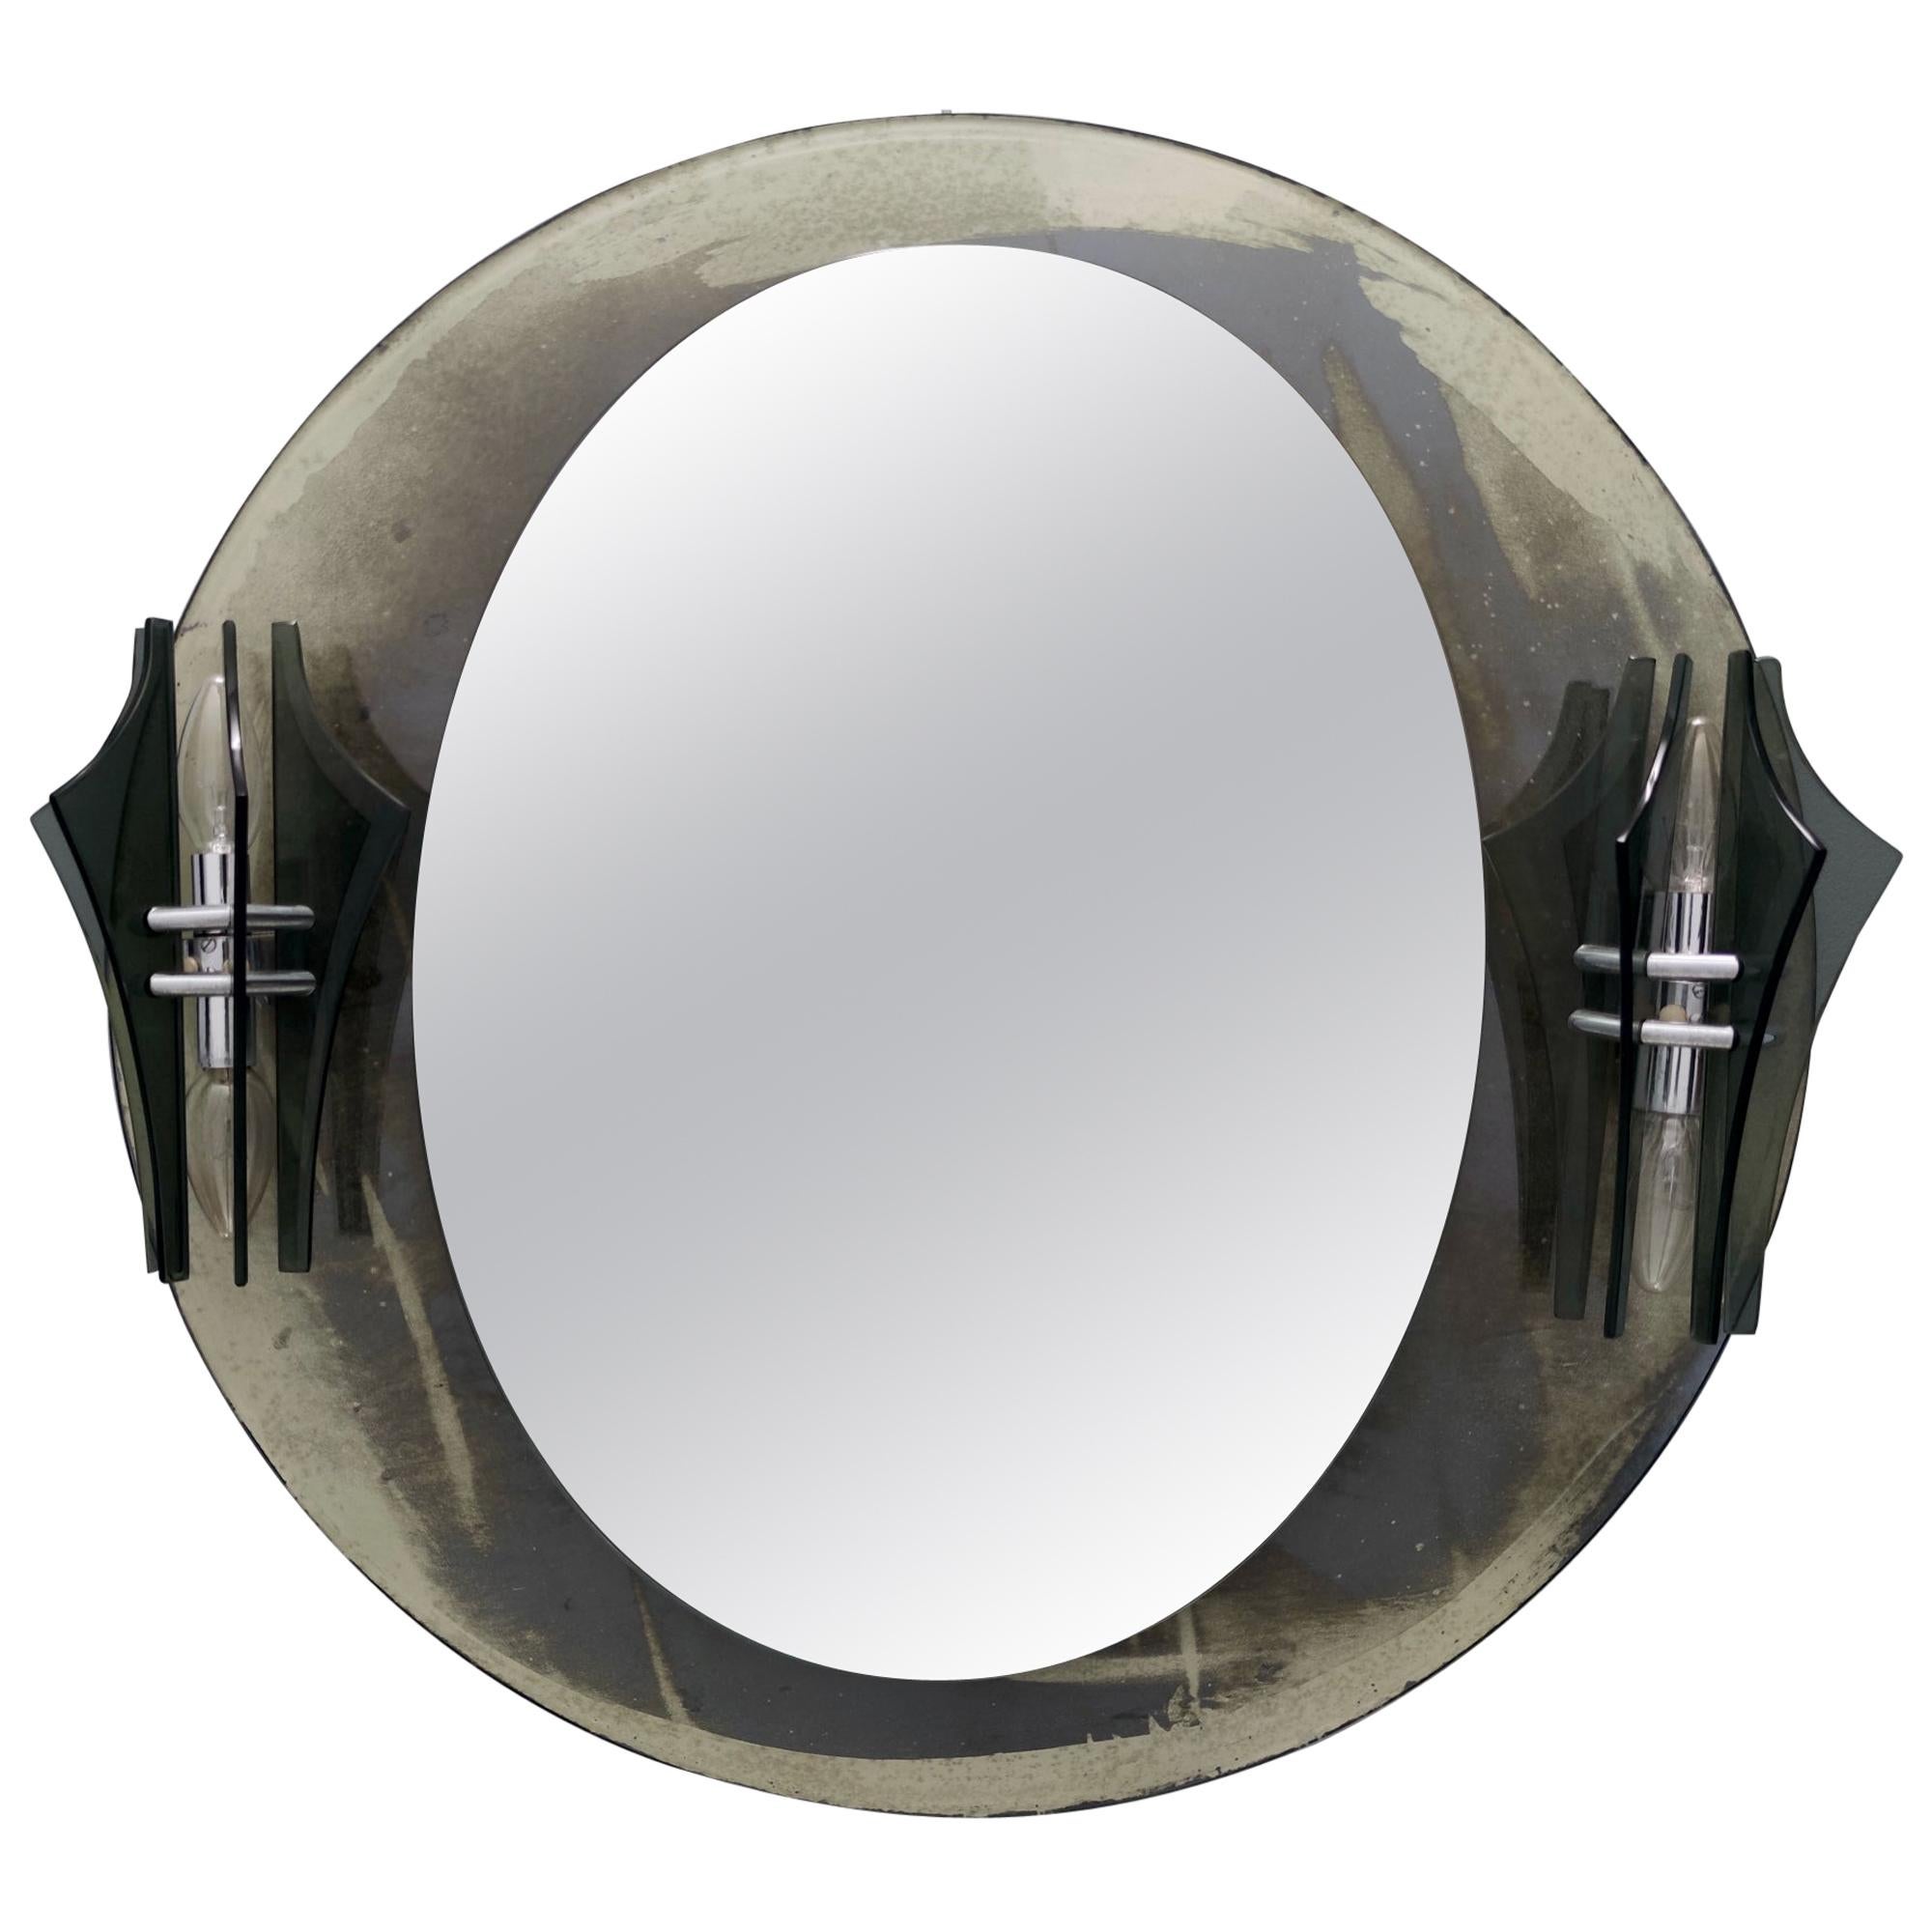 Postmodern Illuminated Artistic Wall Mirror by Metalvetro Galvorame with Sconces